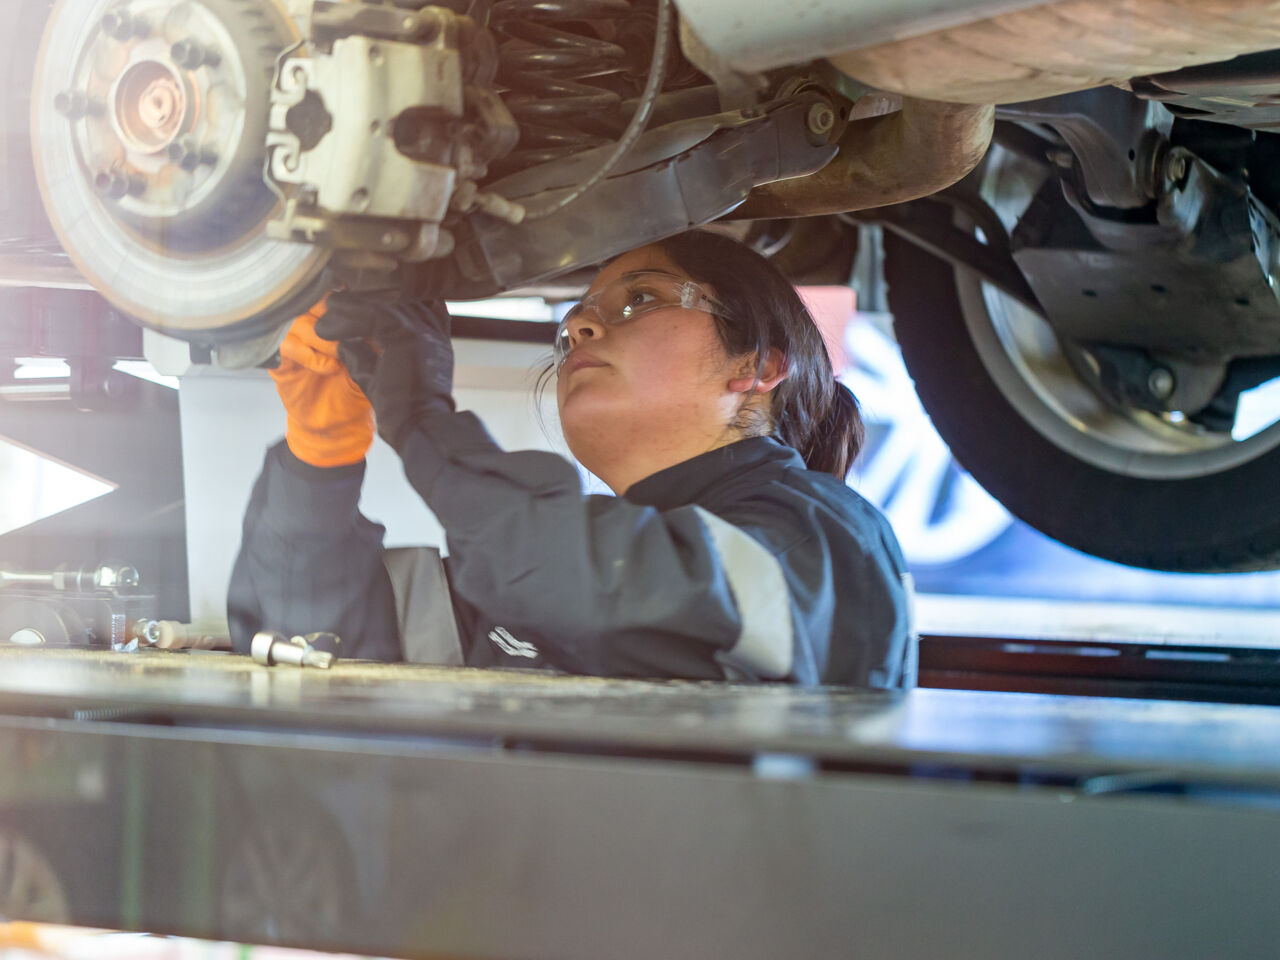 #EmbraceEquity: “We need more women talking about their careers in Automobile Technology”